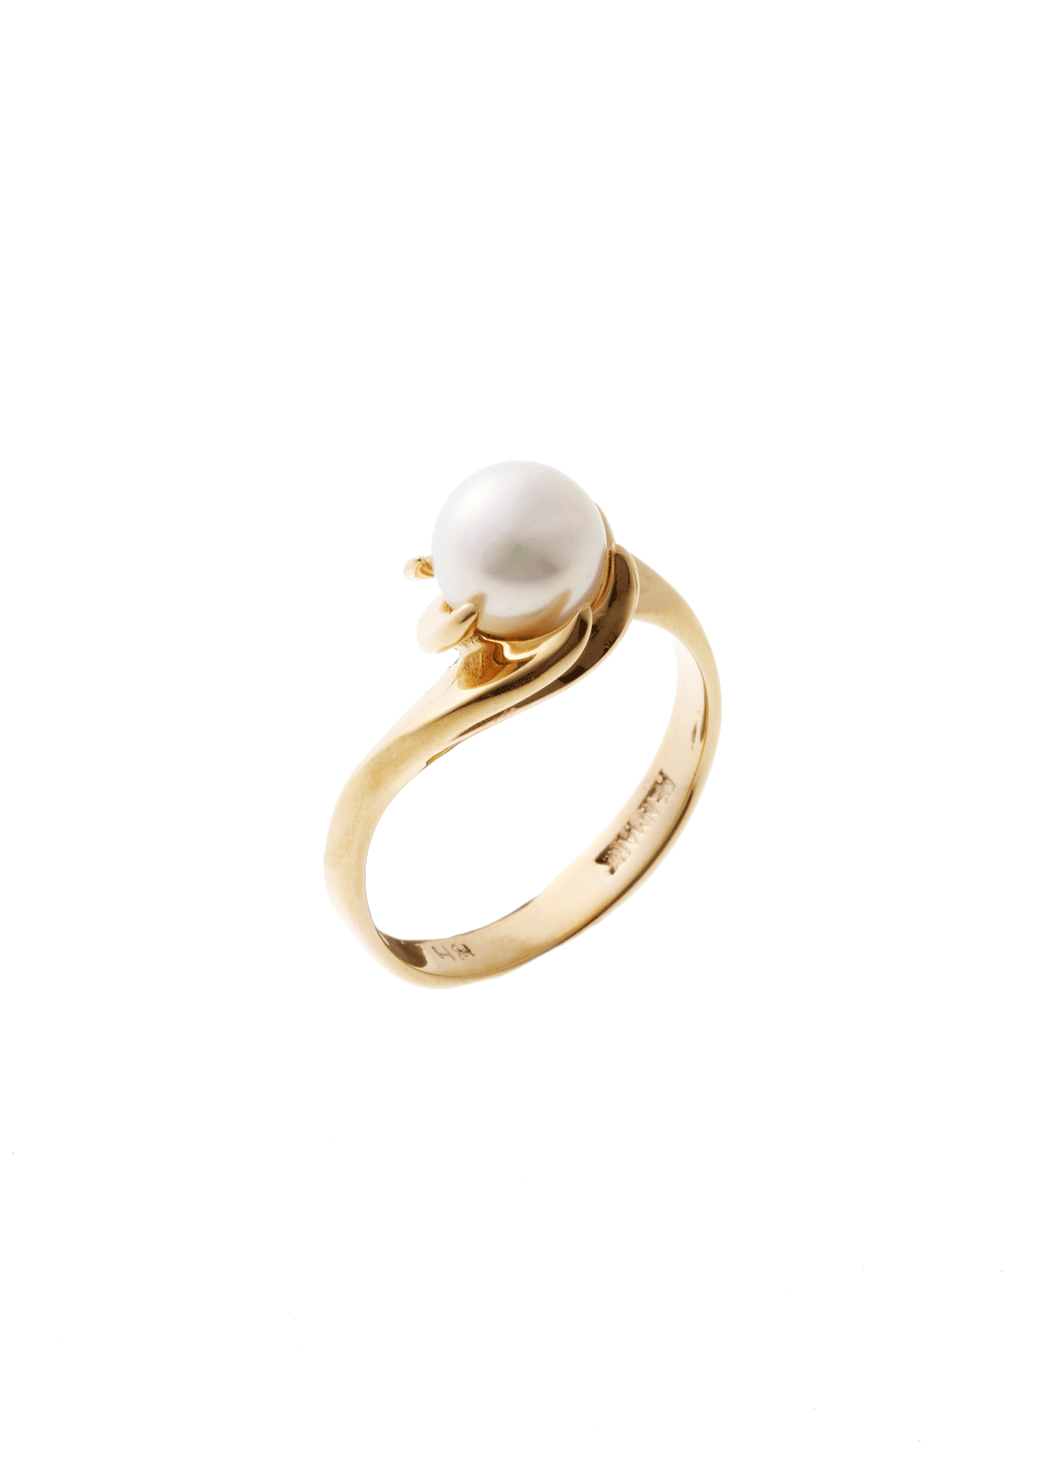 Lund Cph, ring with 7-7.5 mm pearl in 8 kt. gold (333)